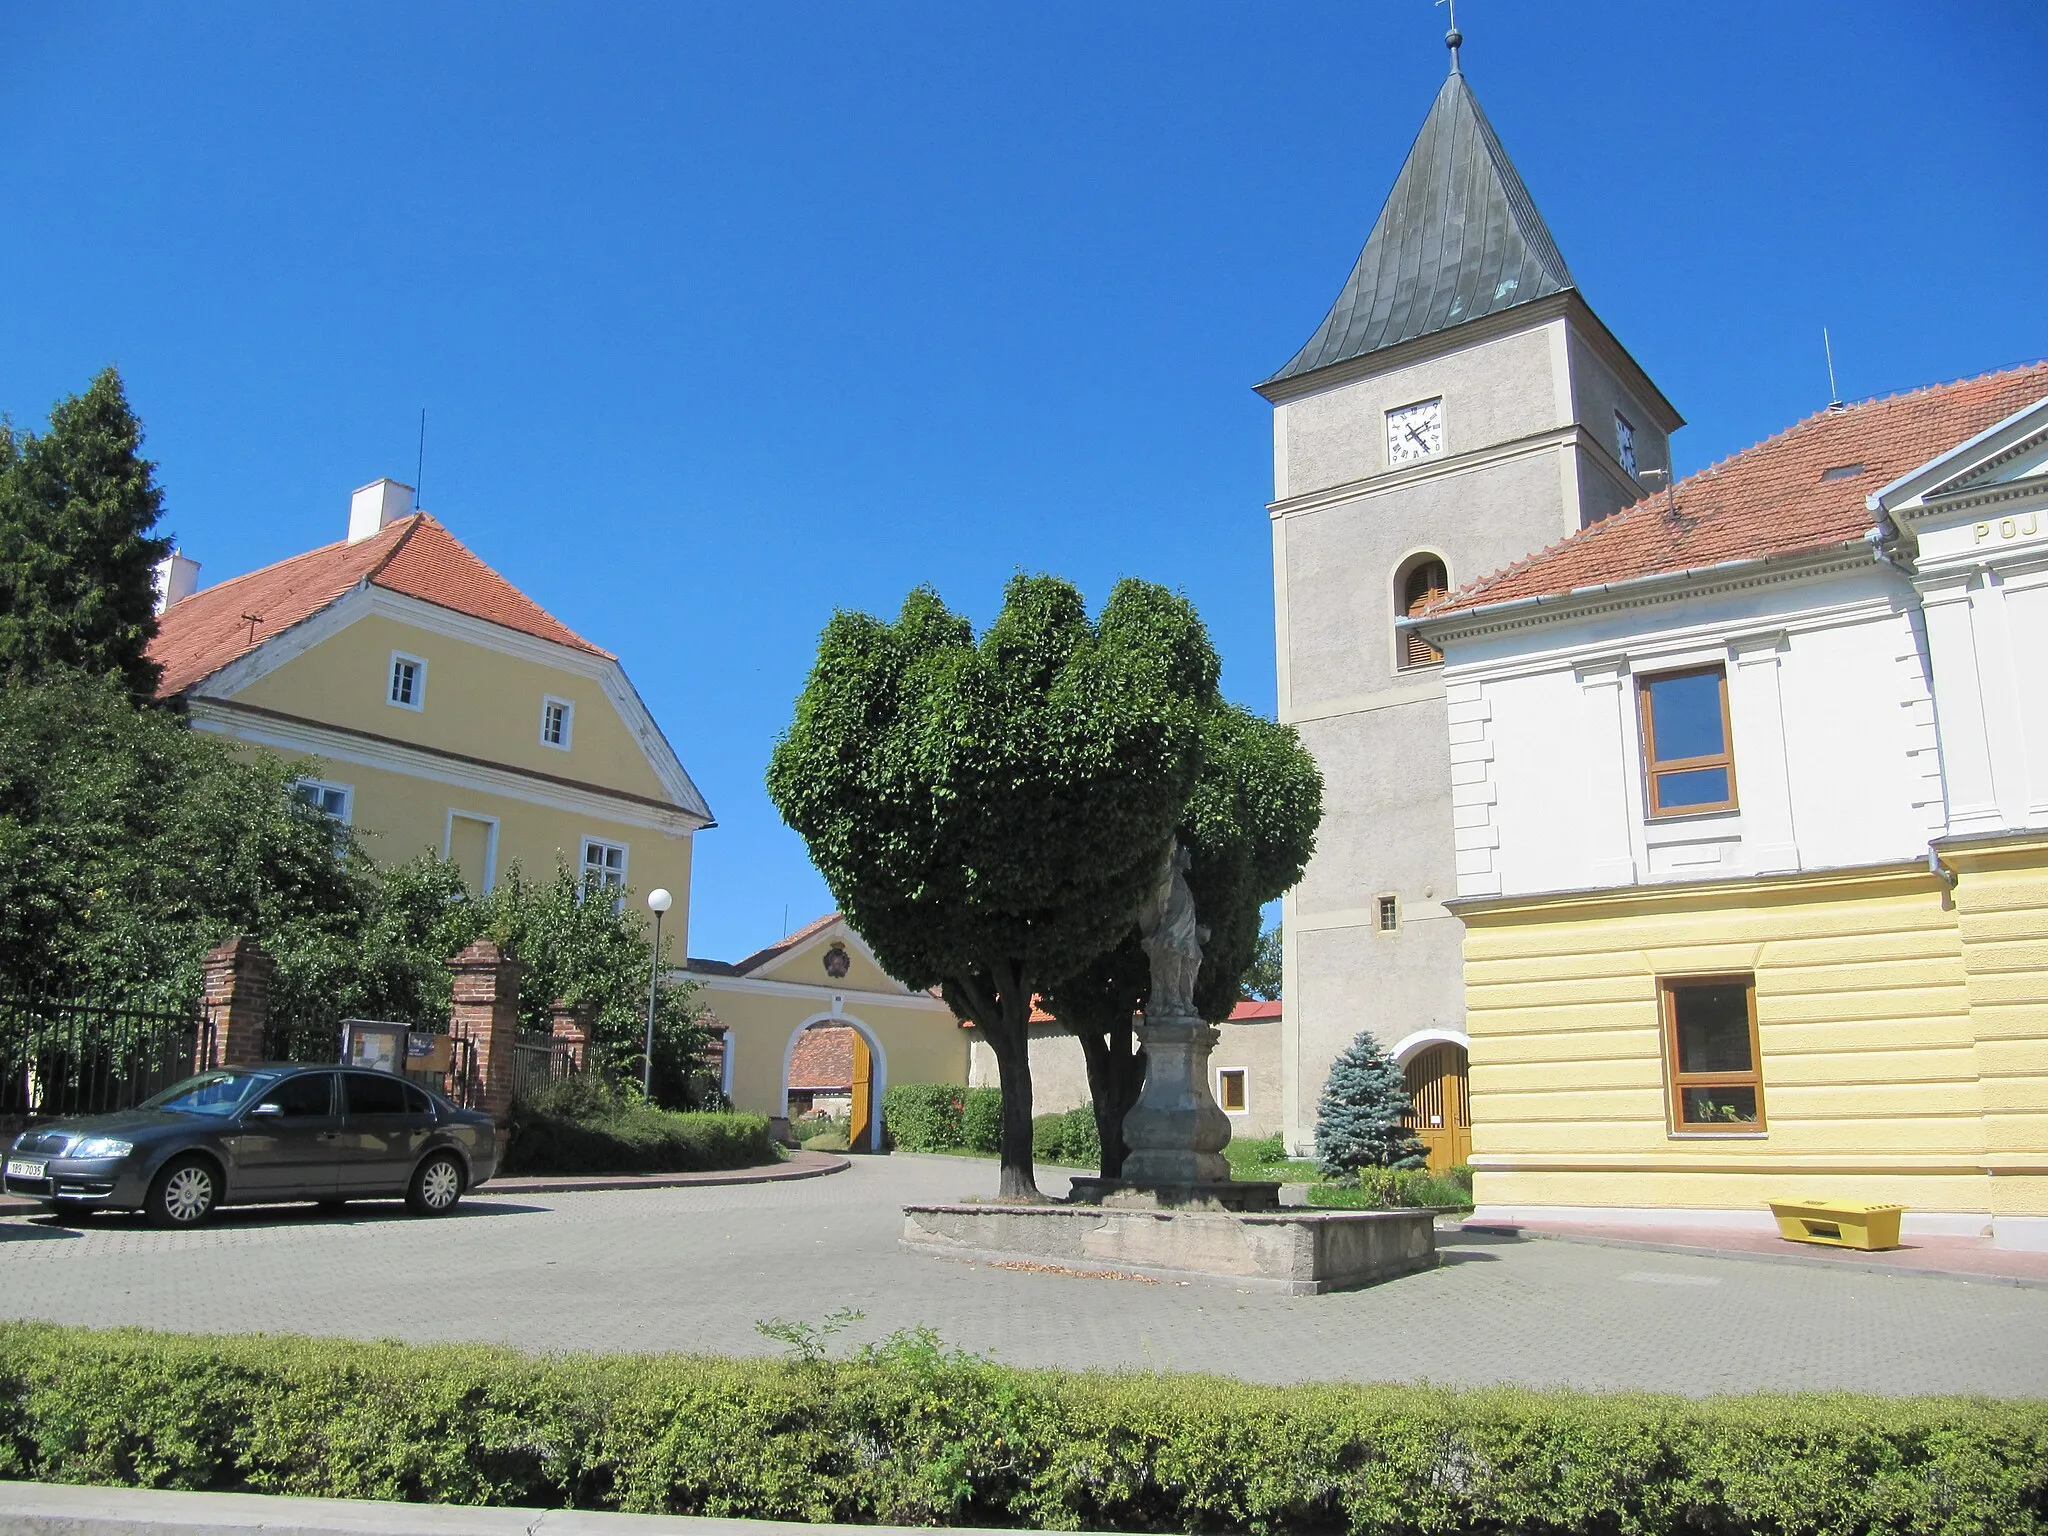 Photo showing: Mohelno in Třebíč District, Czech Republic. Rectory from 1775, tower of All Saints' Church from the 15th century and statue of St. Florian.